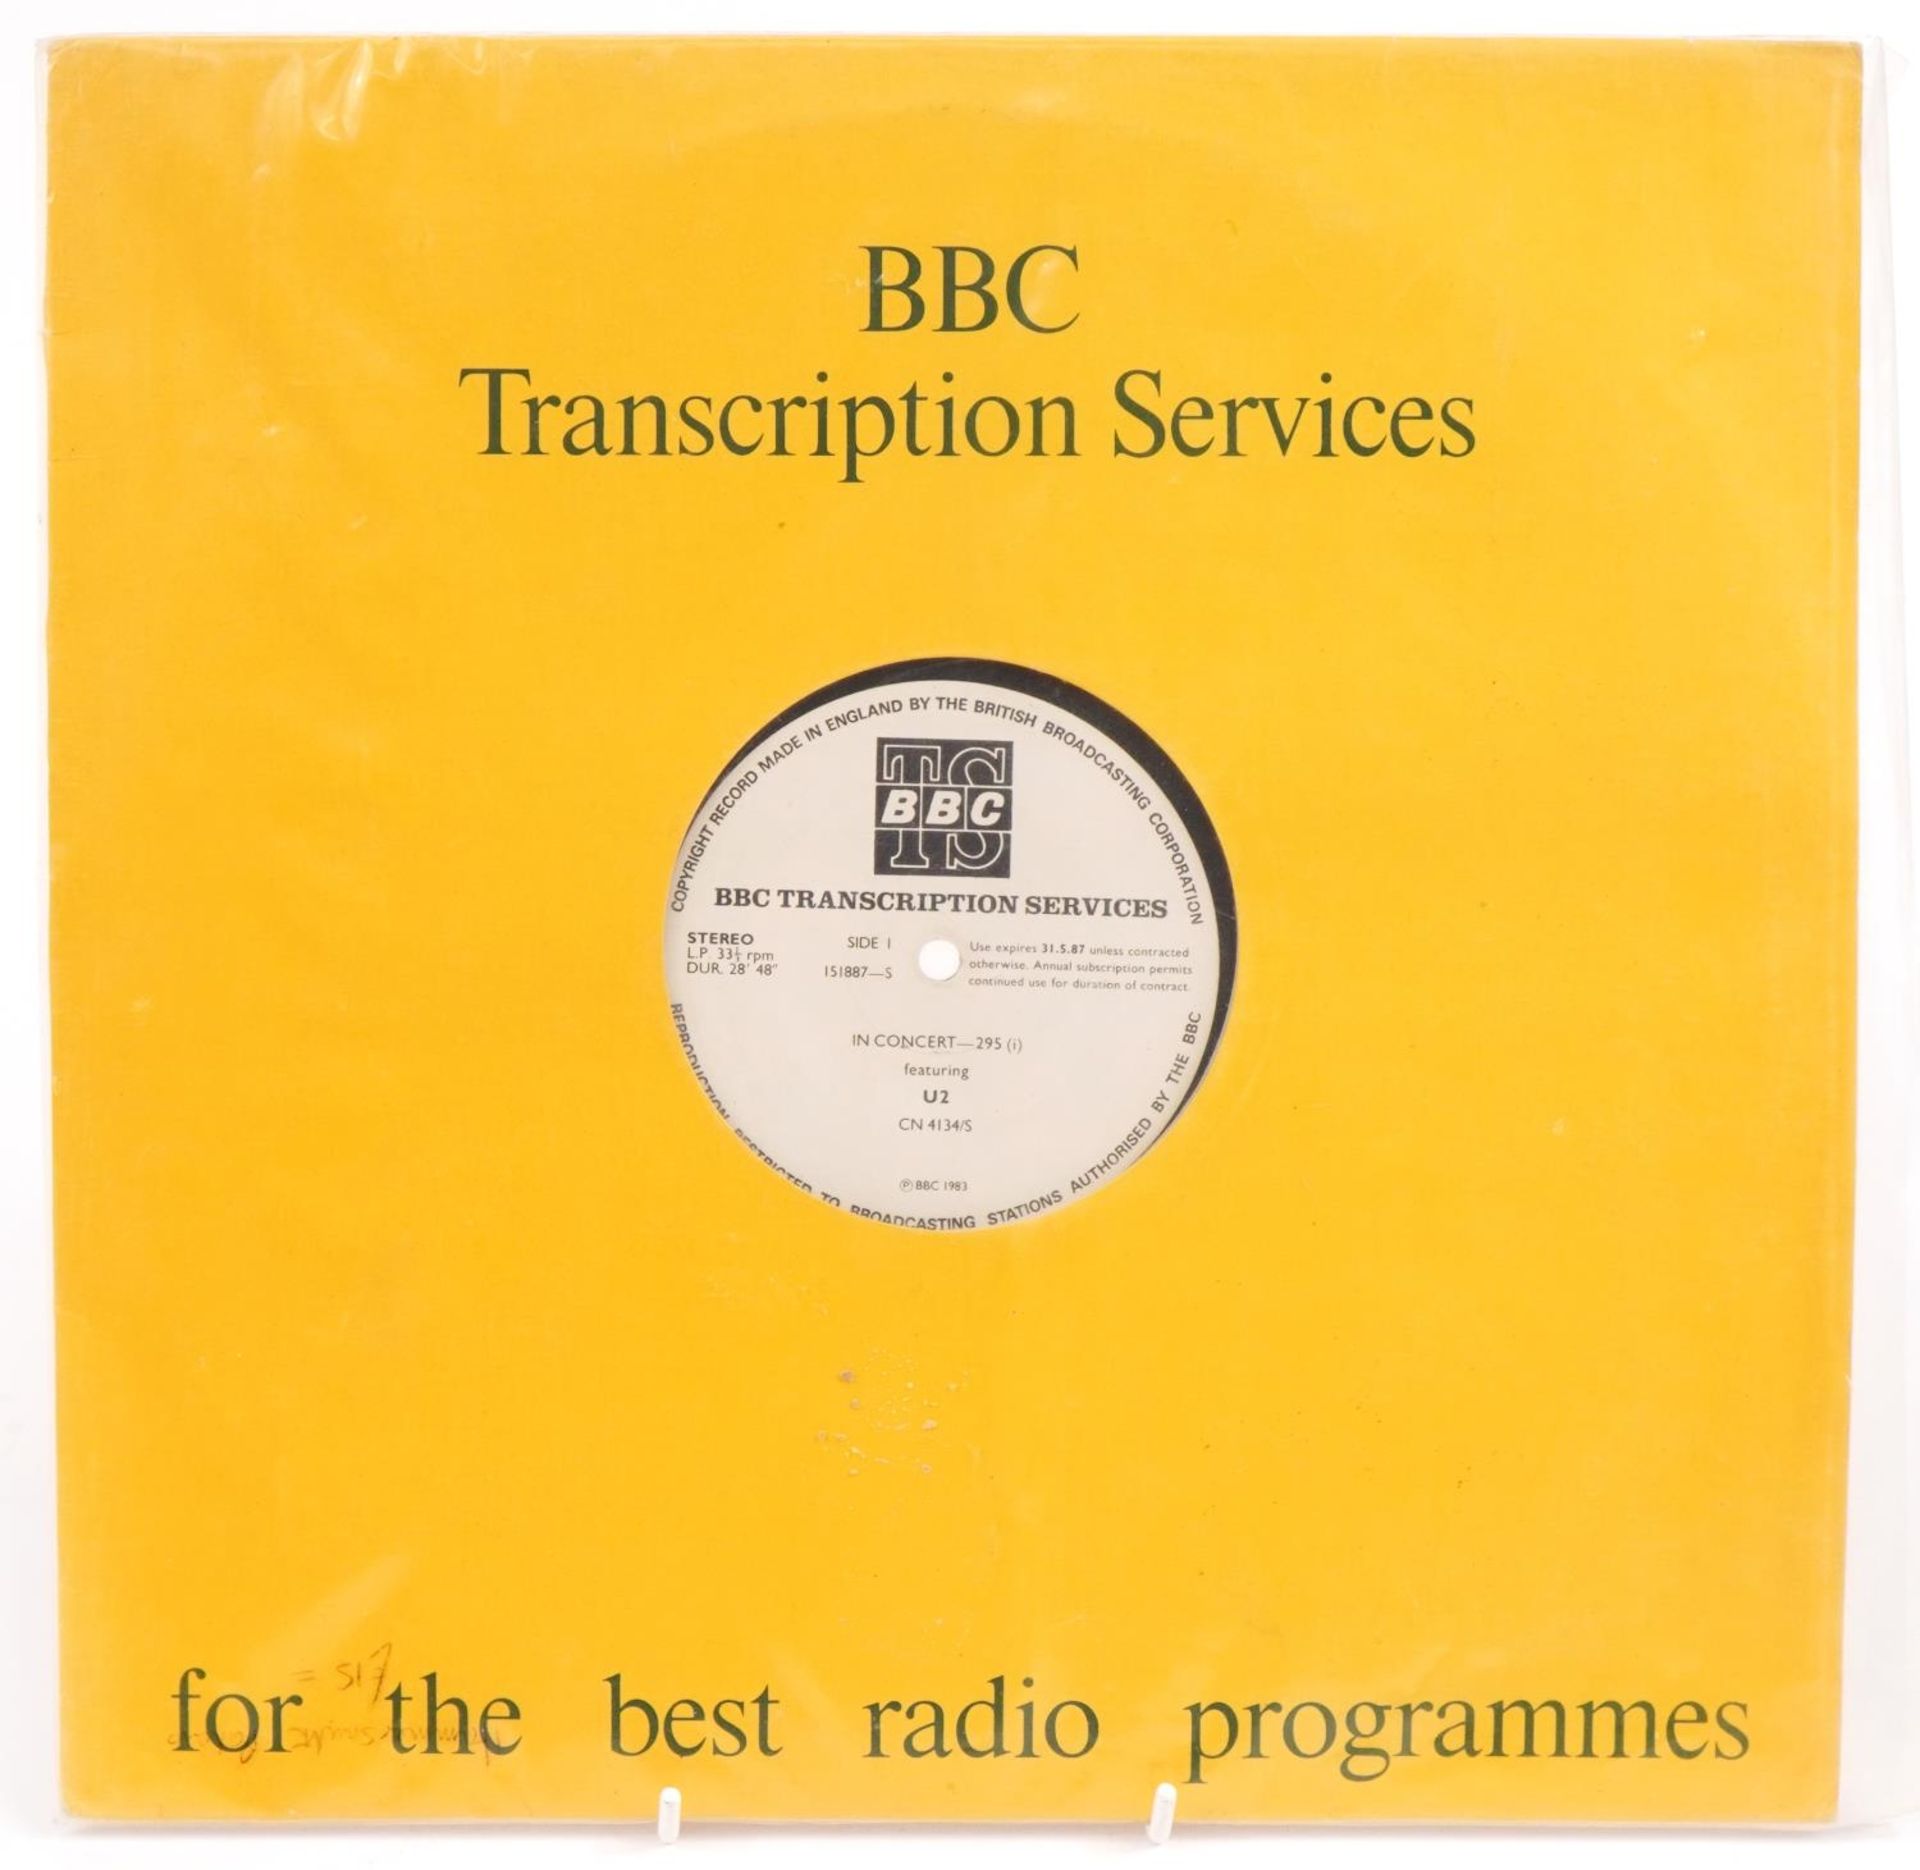 BBC Transcription Services vinyl record In Concert featuring U2 with sleeve